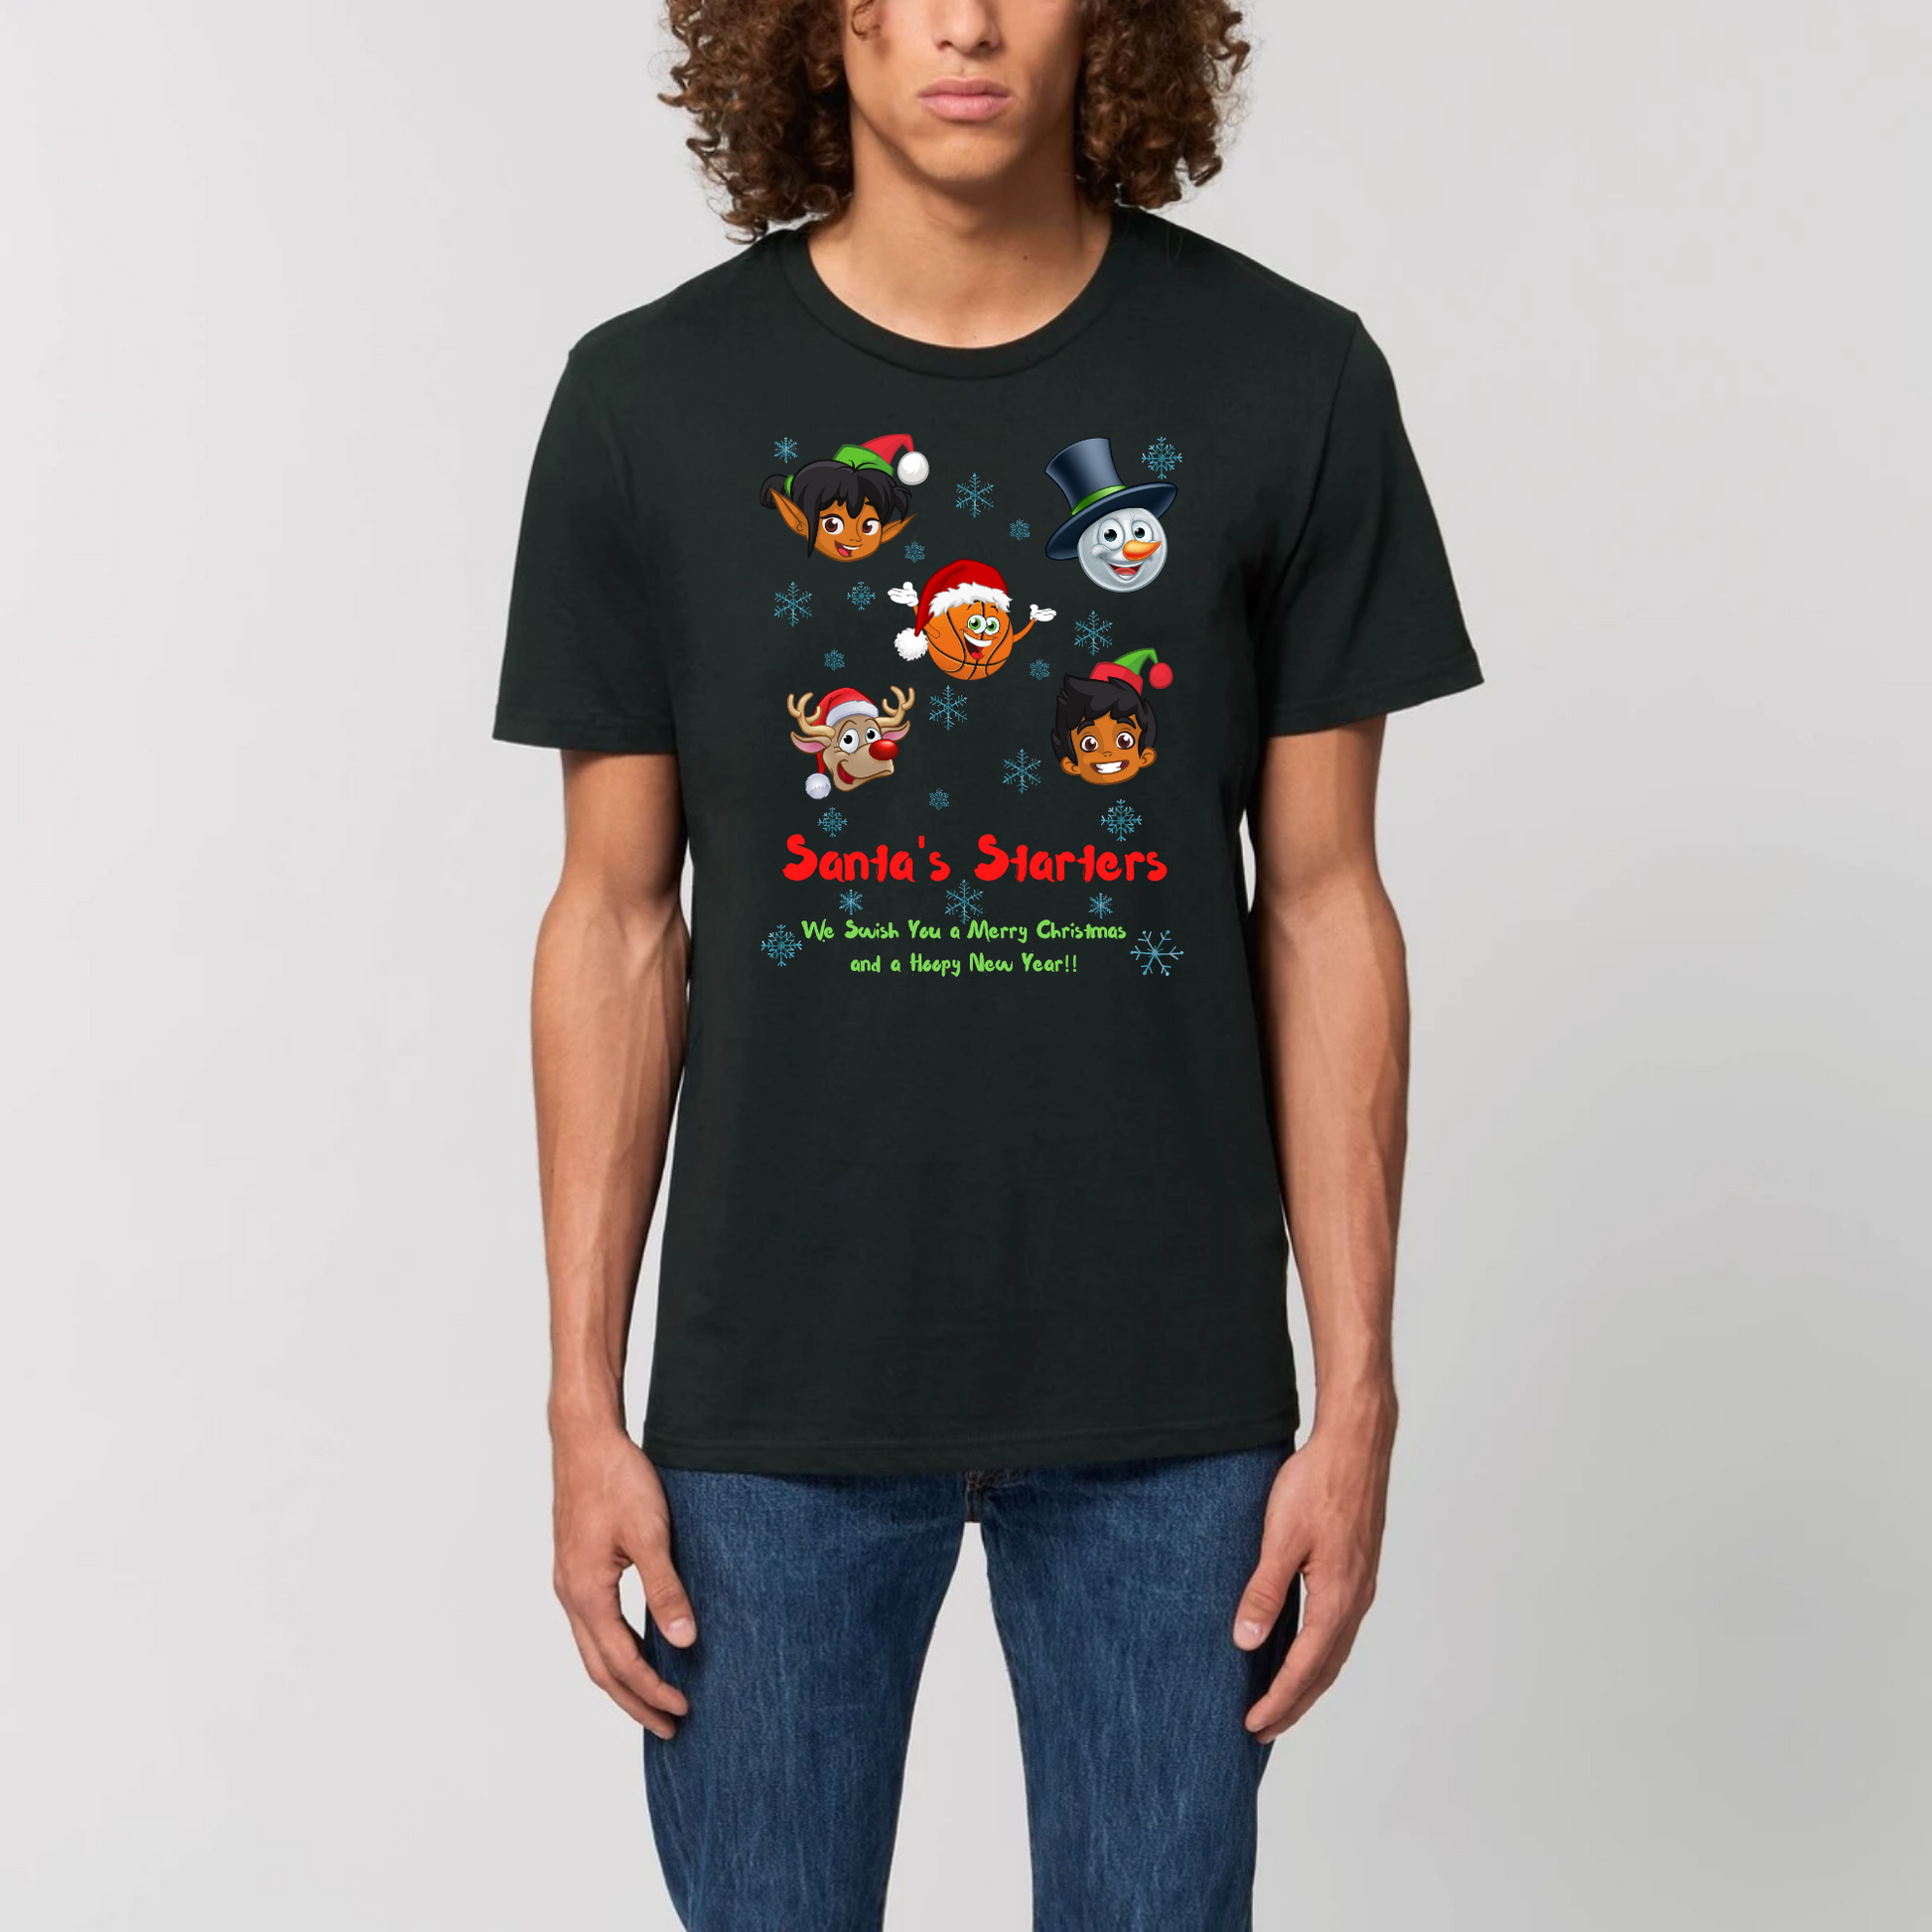 Model wearing a basketball themed Christmas t-shirt with a print design, The design features 5 cartoon character heads of 2 elves, a snowman, Rudolf and a basketball head with the heading Santa's Starters and sub heading We swish you a Merry Christmas and a Hoopy New Year. The t-shirt is Black